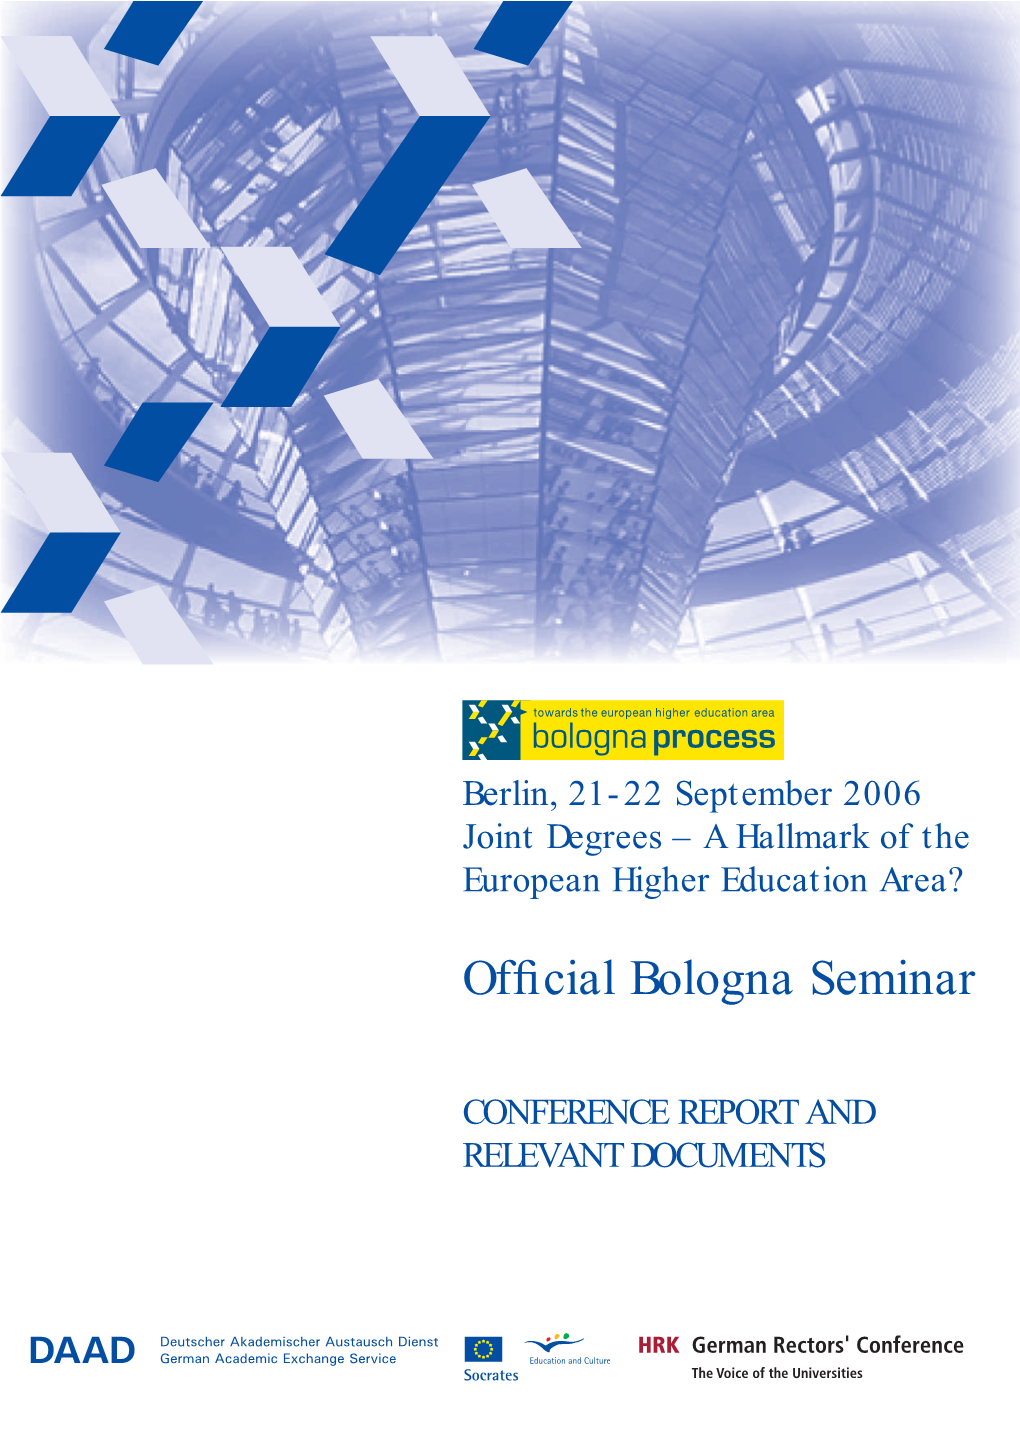 Joint Degrees – a Hallmark of the European Higher Education Area?